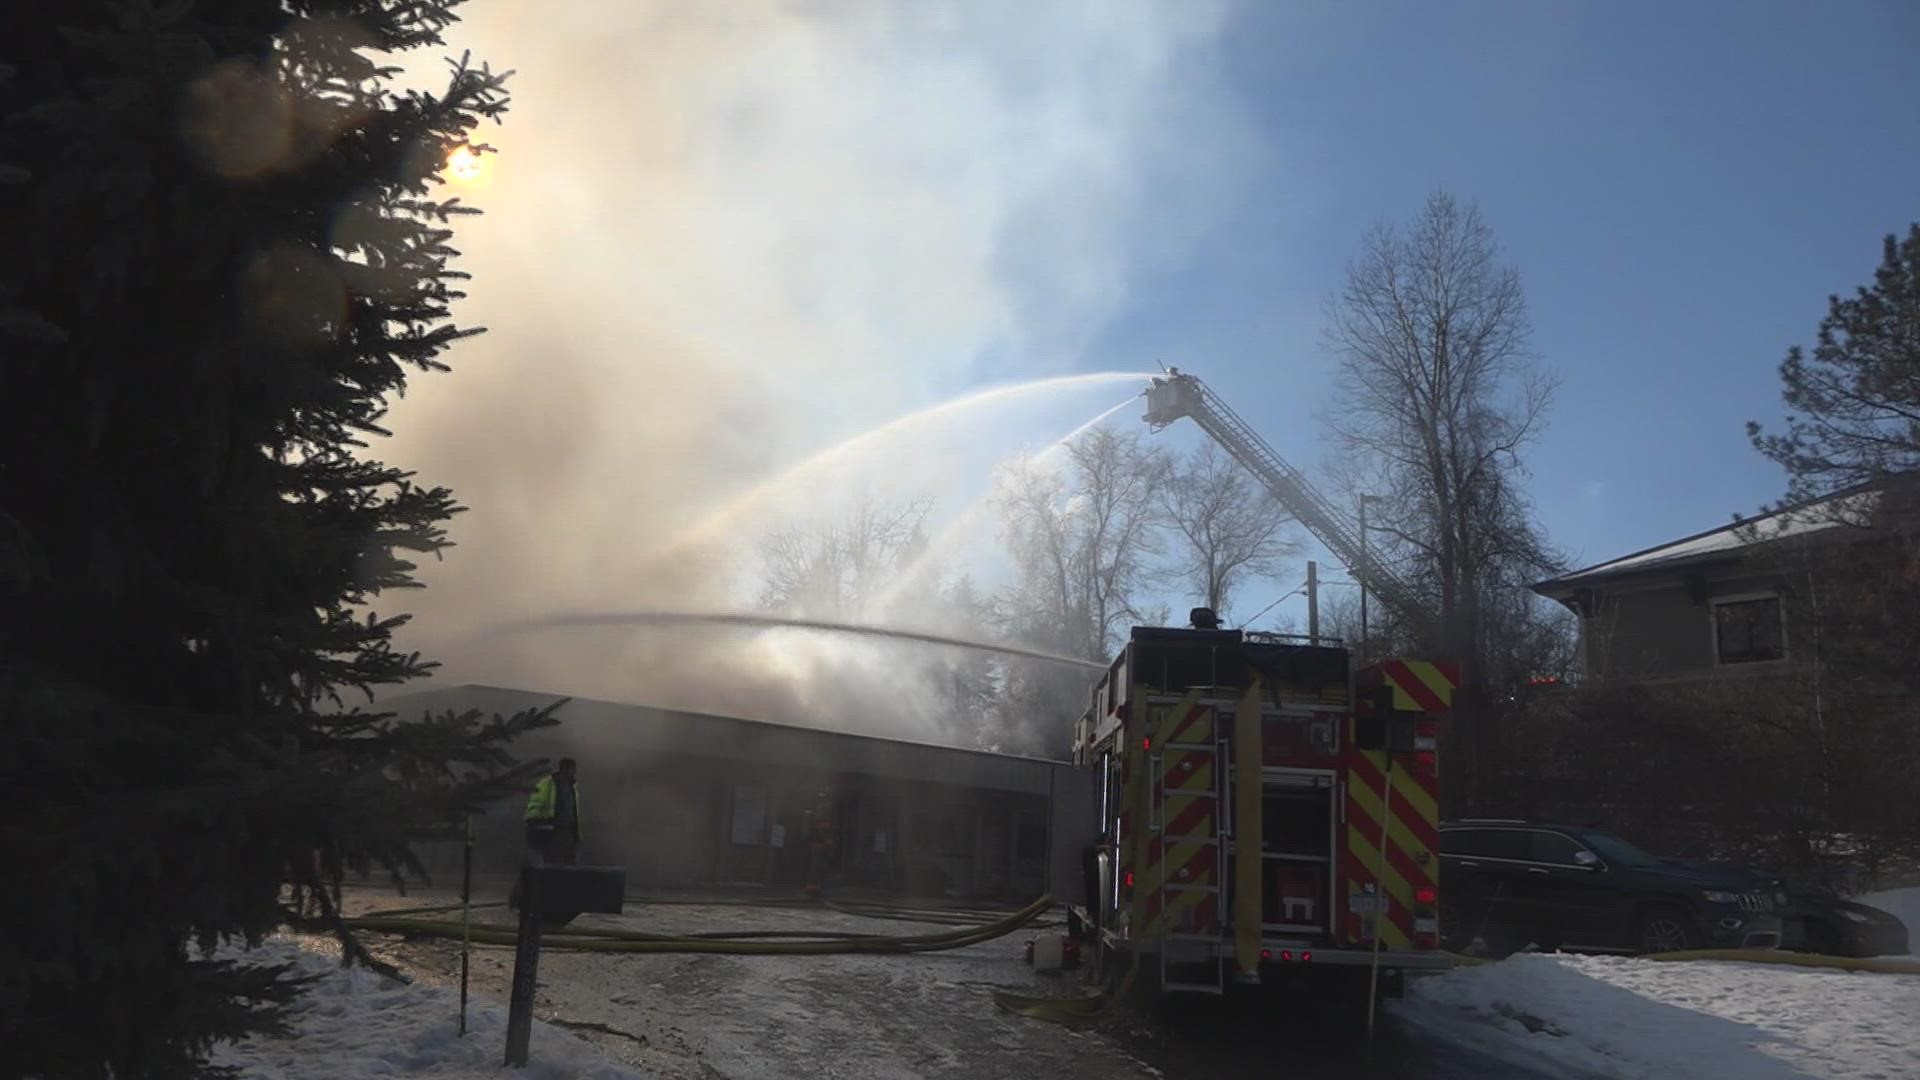 A fire broke out at the Cascade Executive Center on 28th Street SE Friday morning, resulting in extensive damage to the structure and a breached roof.